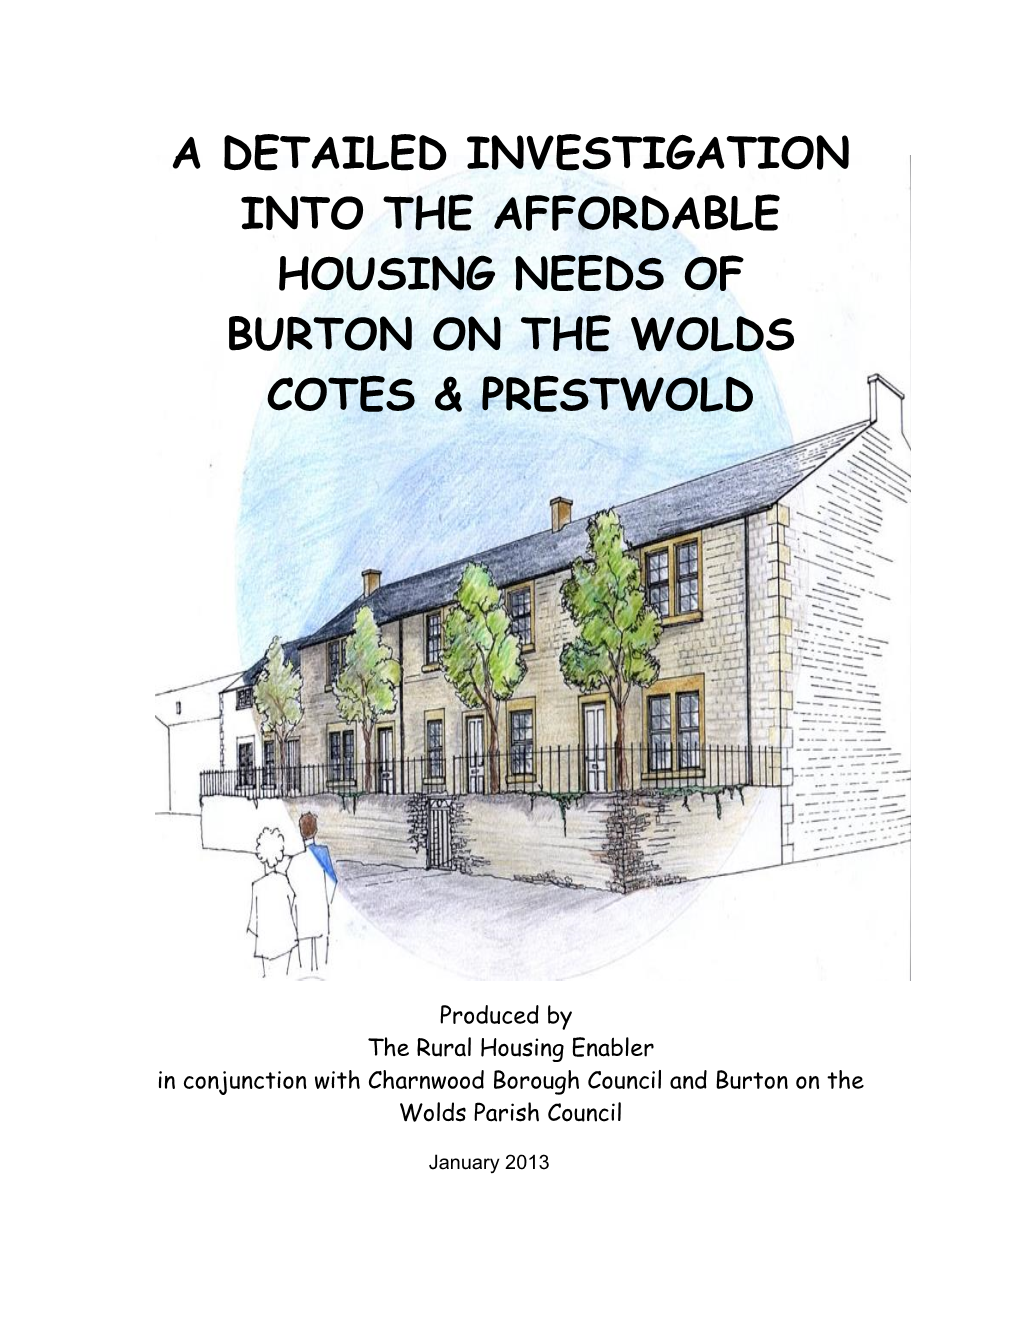 Burton on the Wolds Cotes Prestwold Rural Housing Need